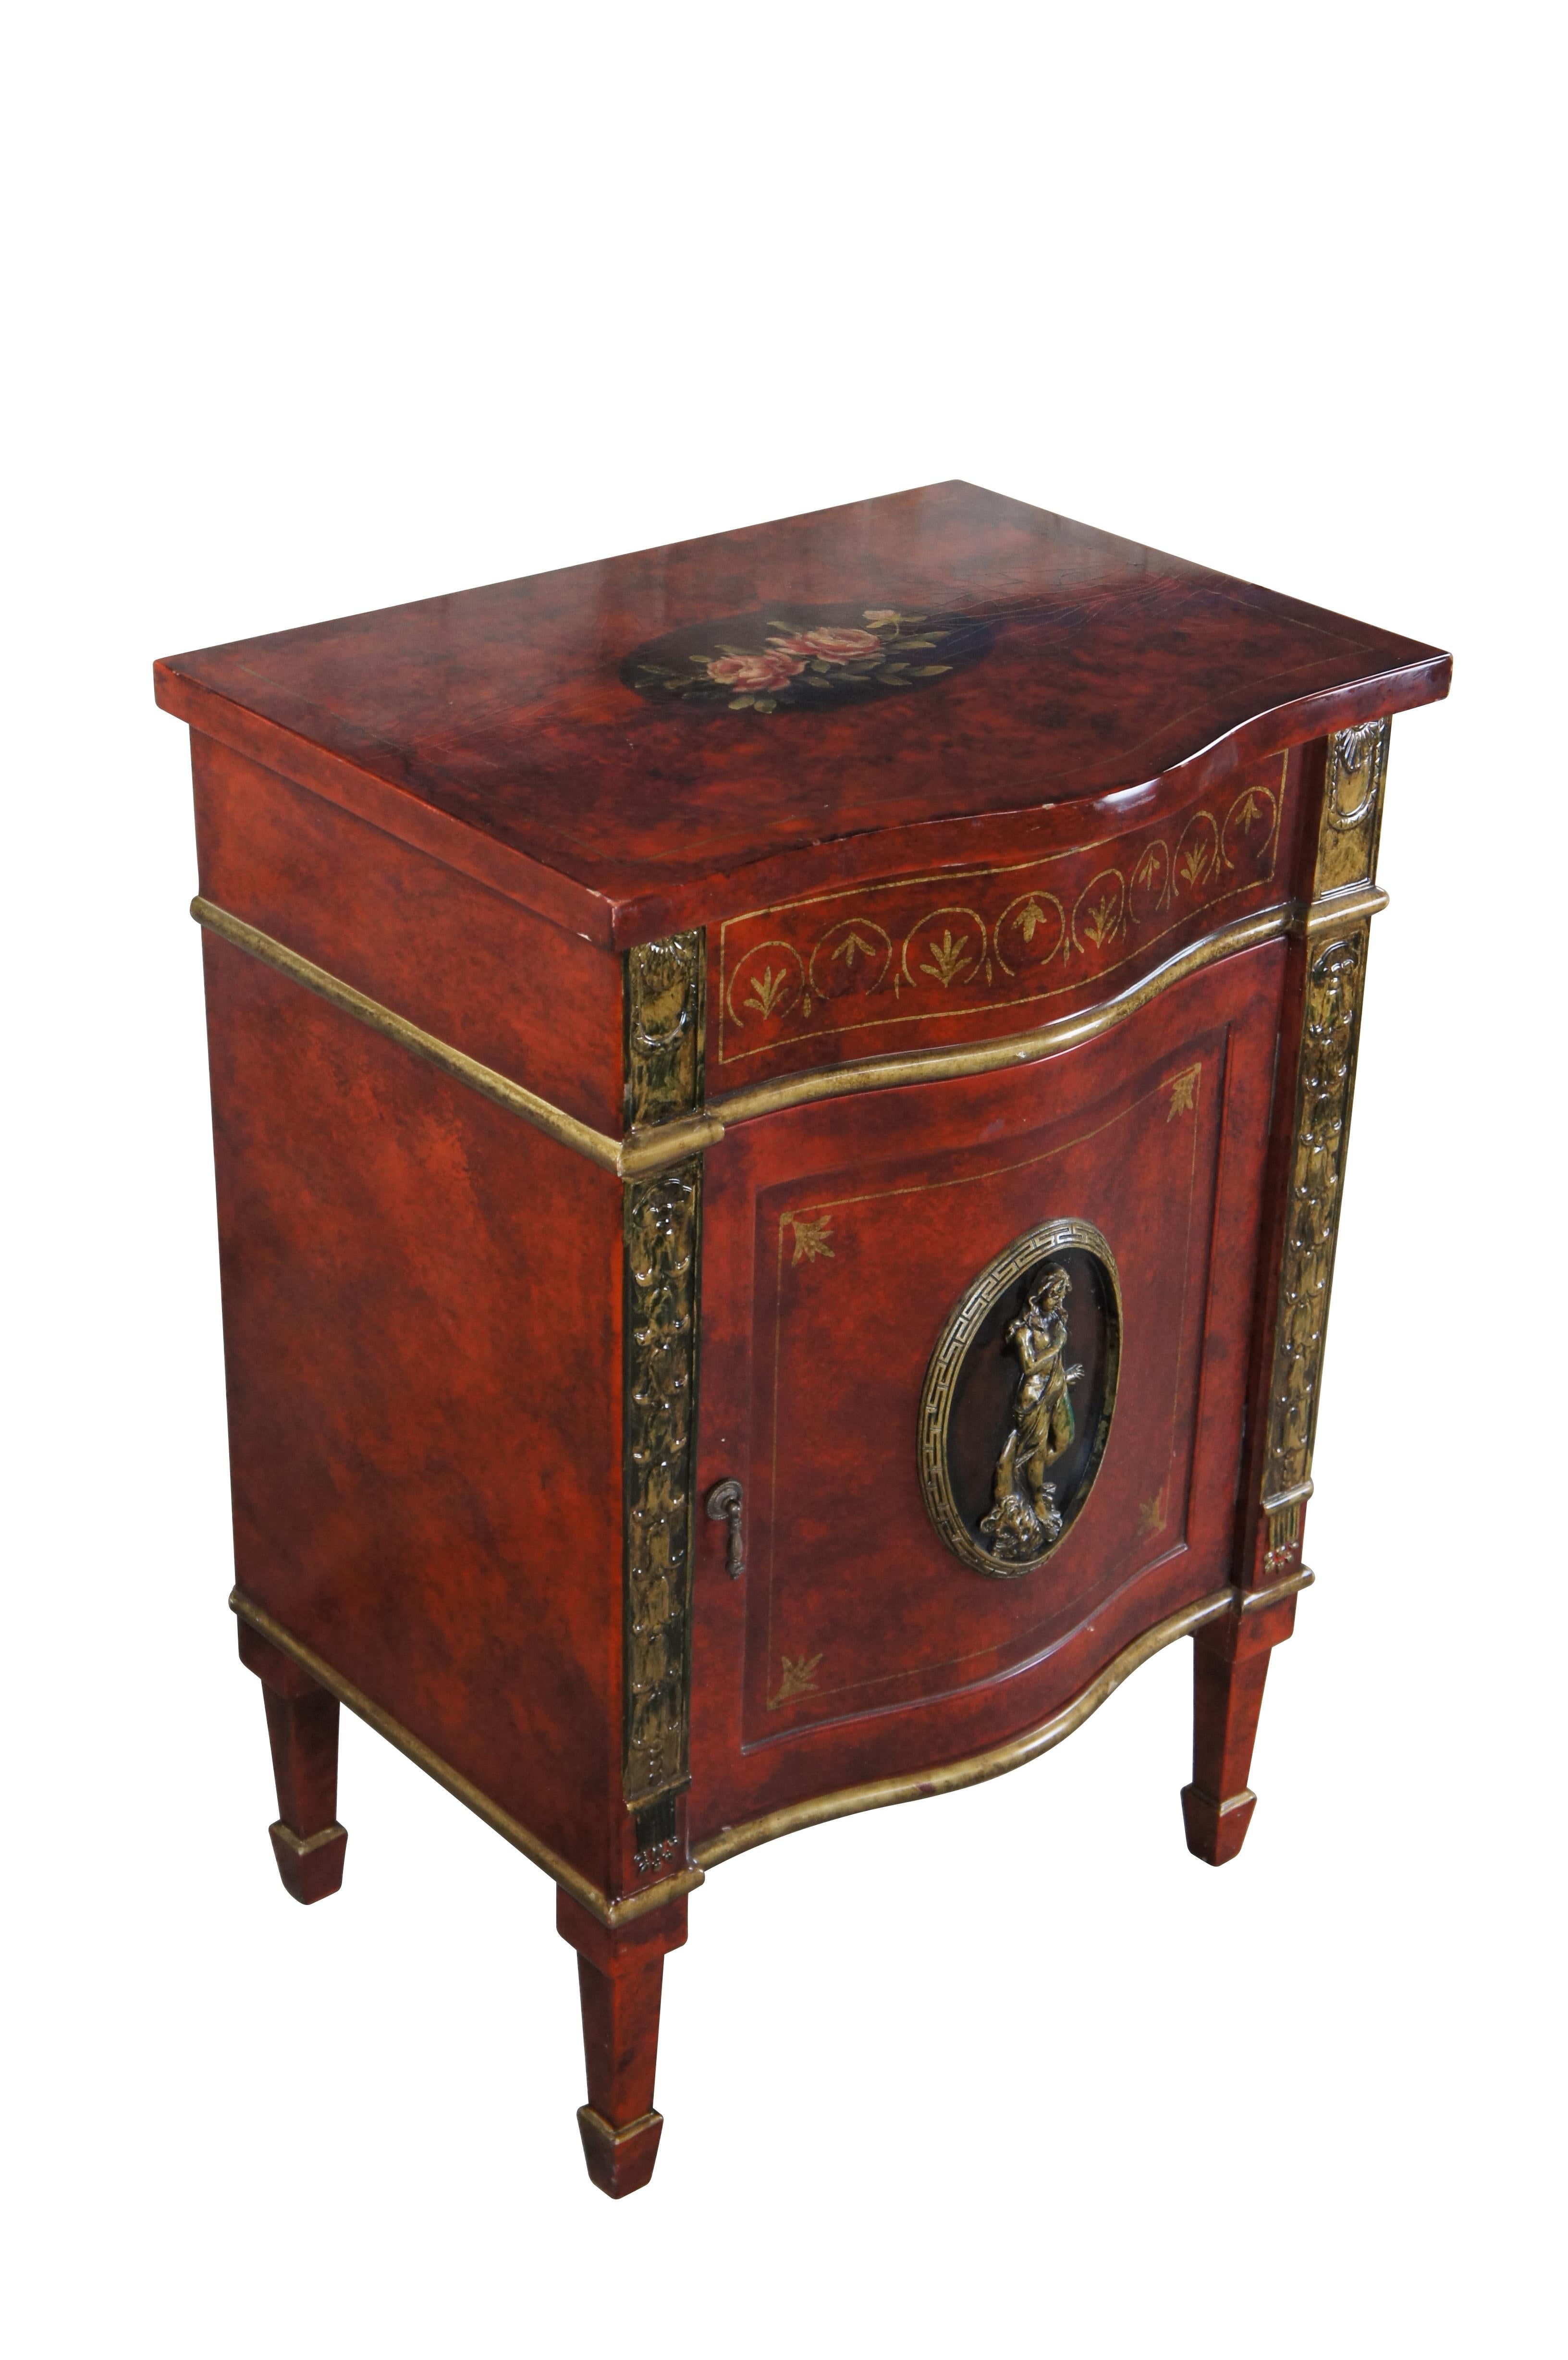 French Louis XVI inspired Boulle Style Faux marbled red lacquer chest, side table or entry commode. Features a serpentine form with gold trim and lower cabinet for accessory storage. Lower door has a nice low relief cameo of a nymph framed in a